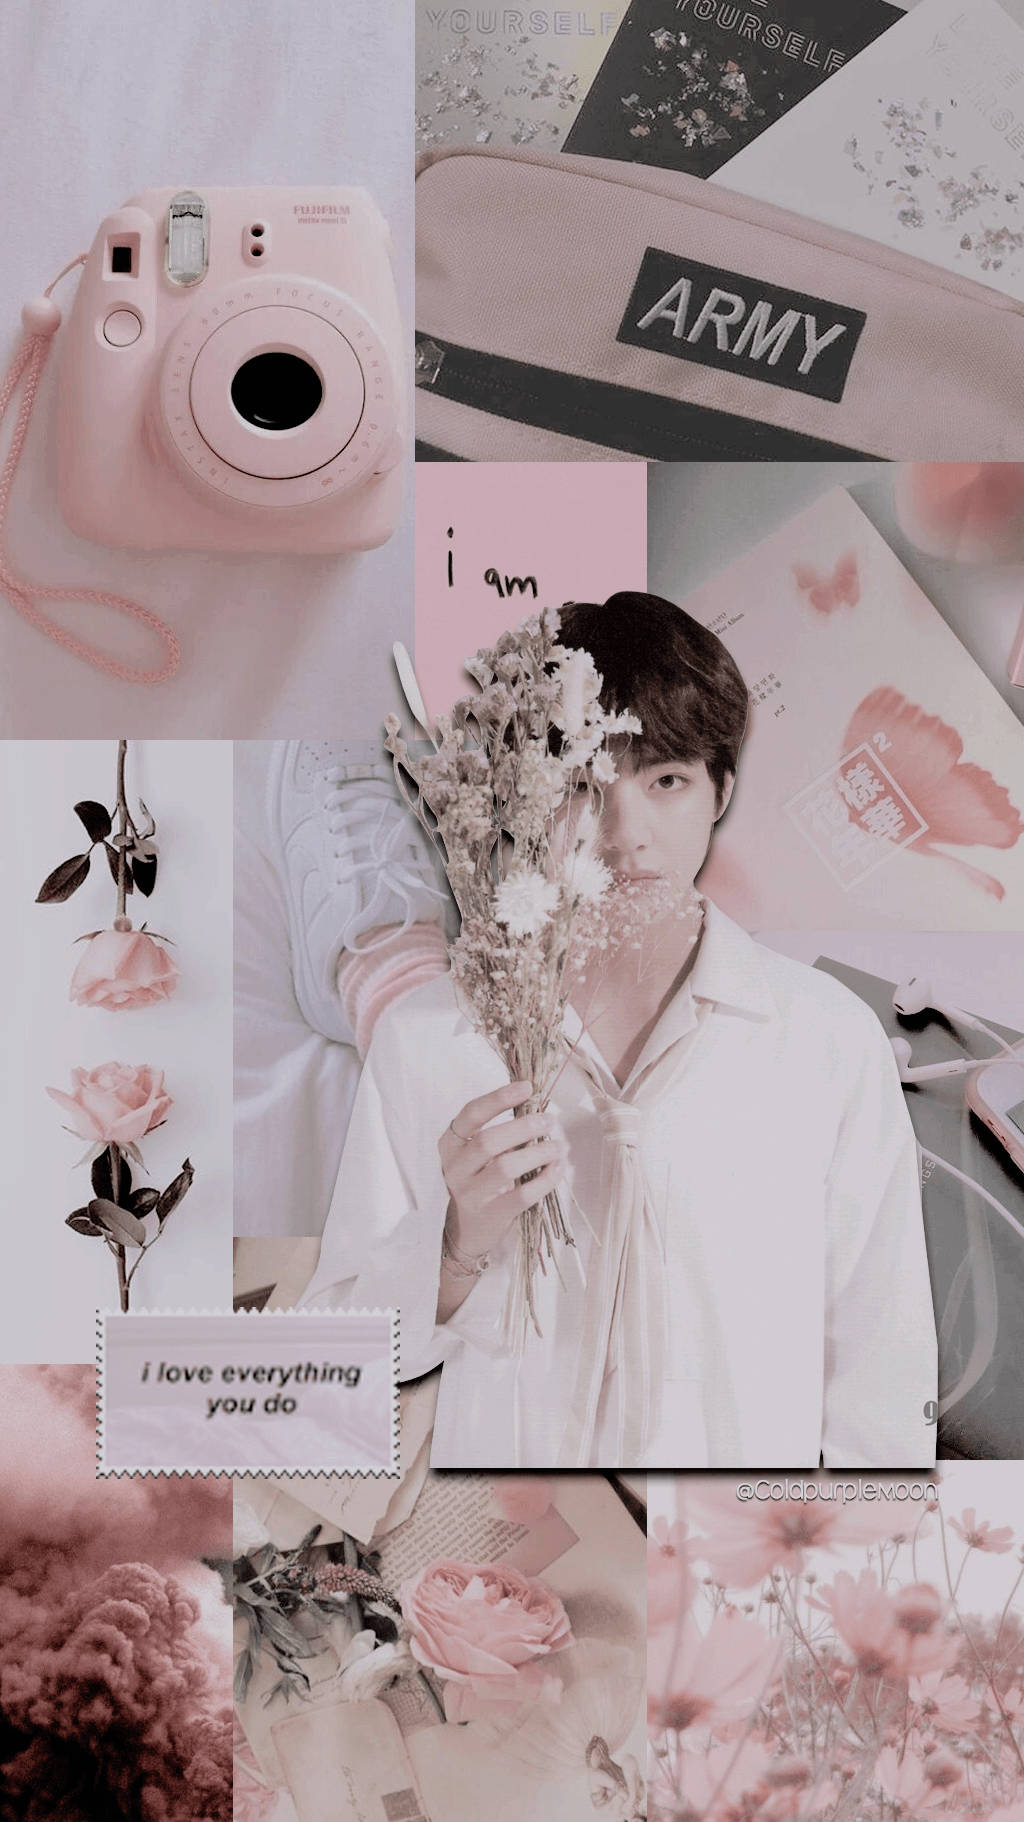 🔥 #bts wallpaper aesthetic #bts #btswallpaper #btsaesthetic #taehyung #  aesthetic - android / iphone hd wallpaper background download HD Photos &  Wallpapers (0+ Images) - Page: 1